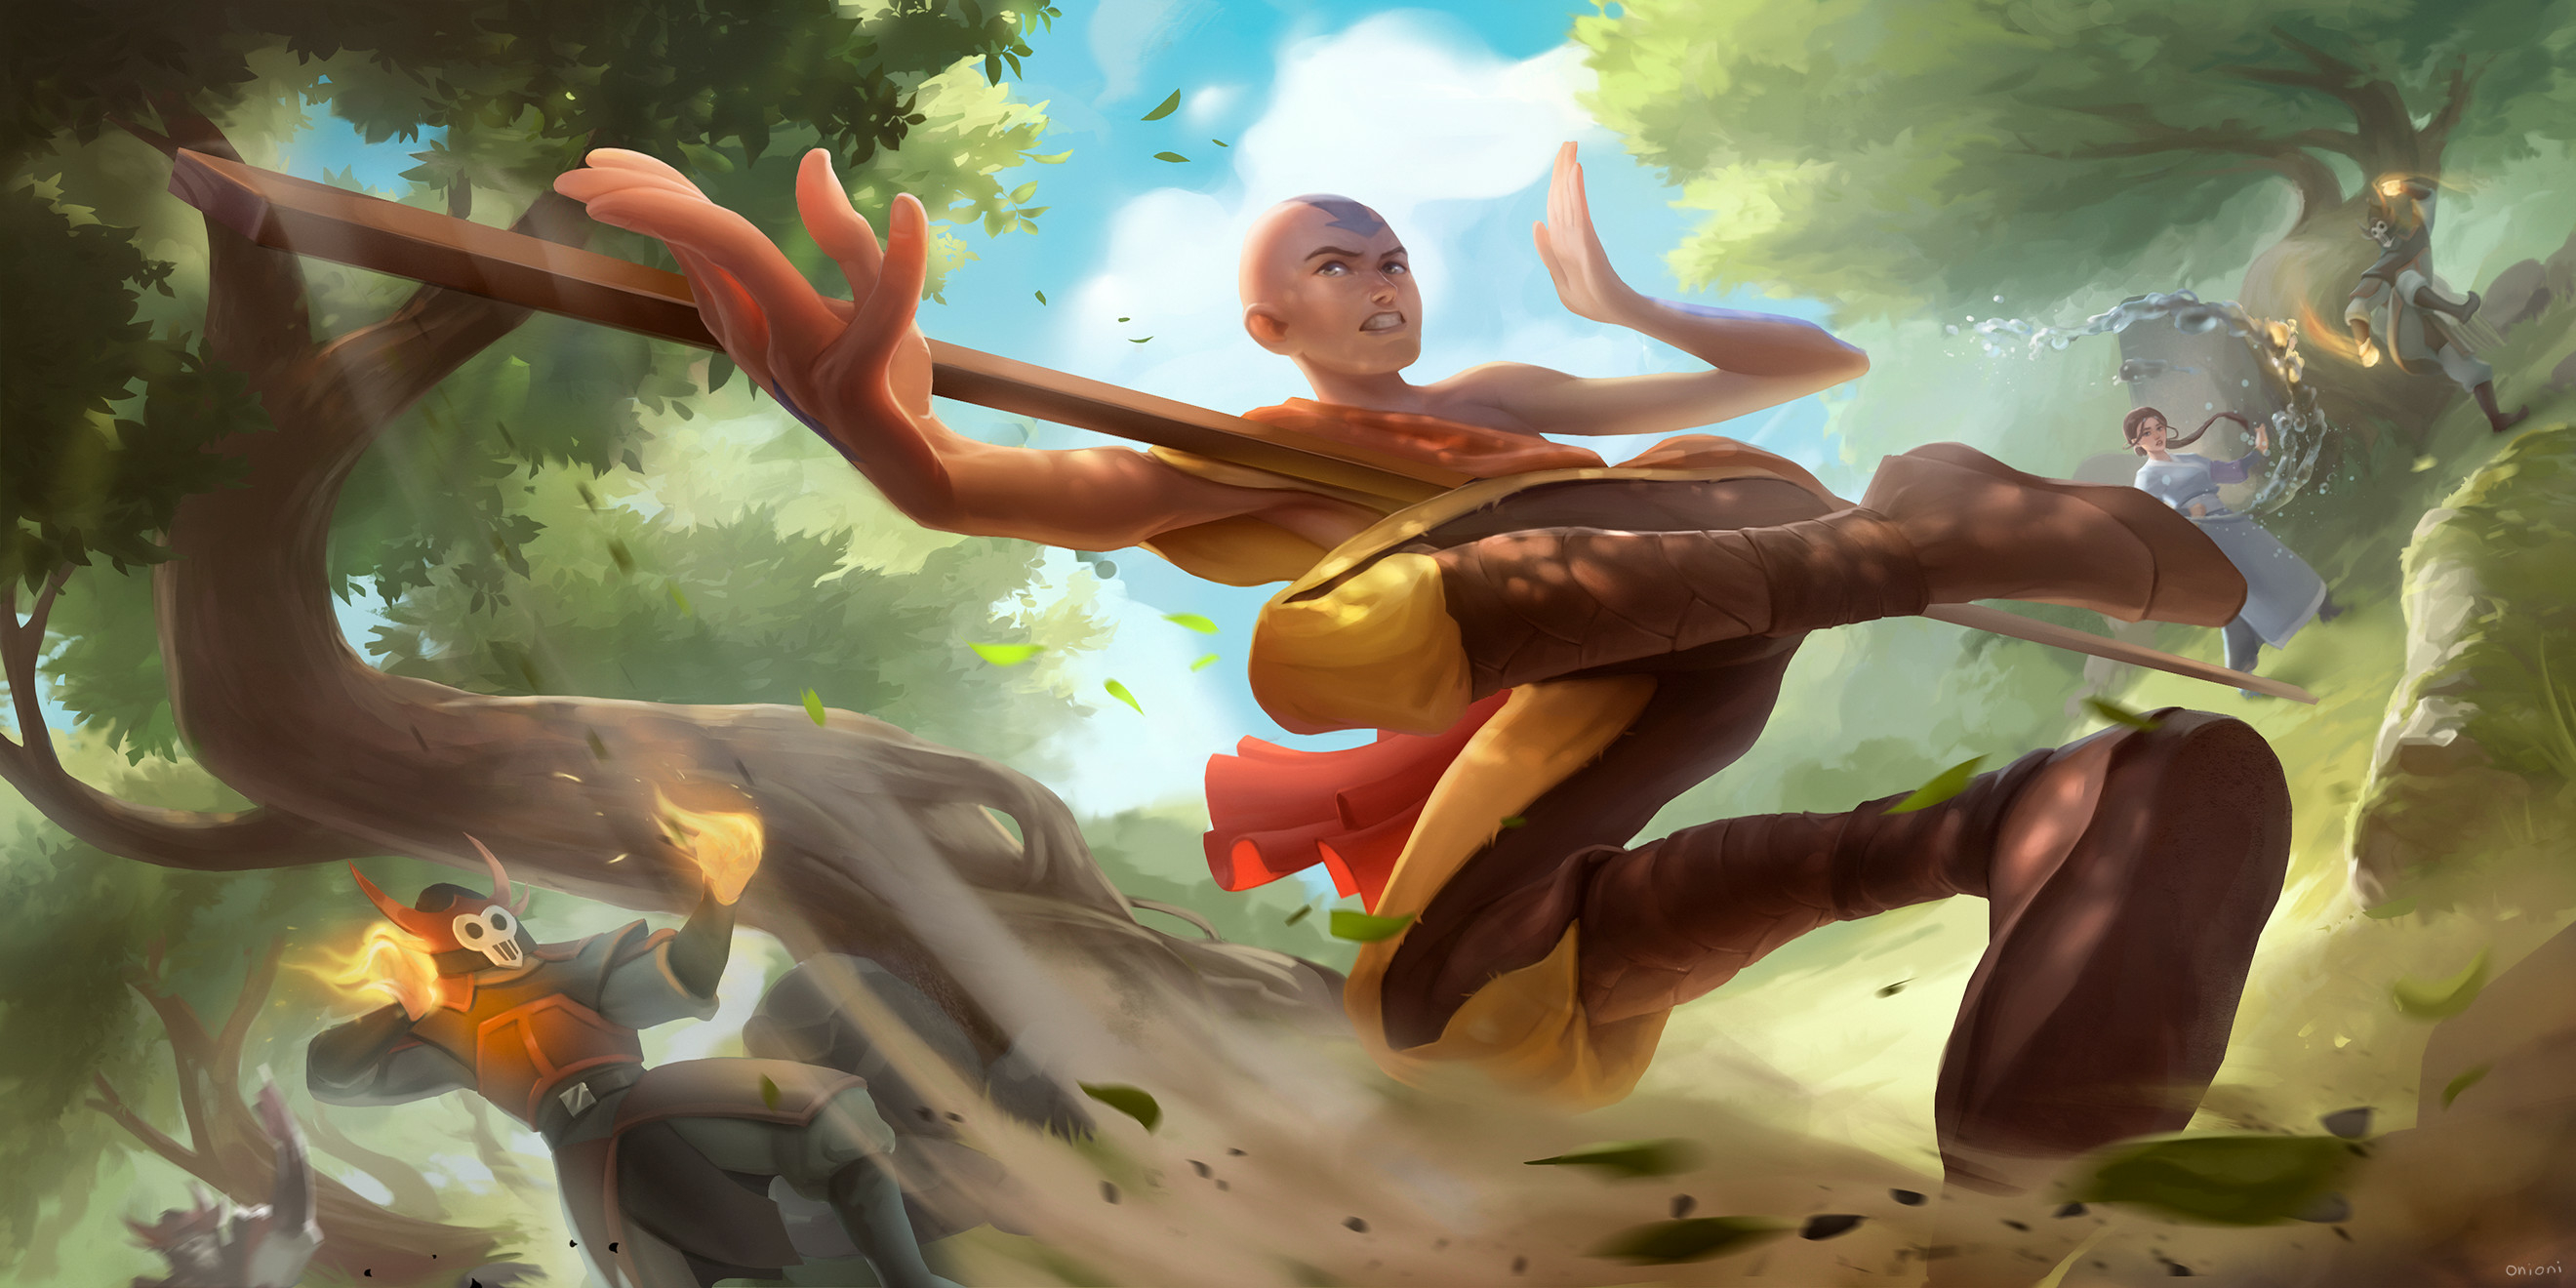 Avatar The Last Airbender HD Wallpapers | 4K Backgrounds - Wallpapers Den